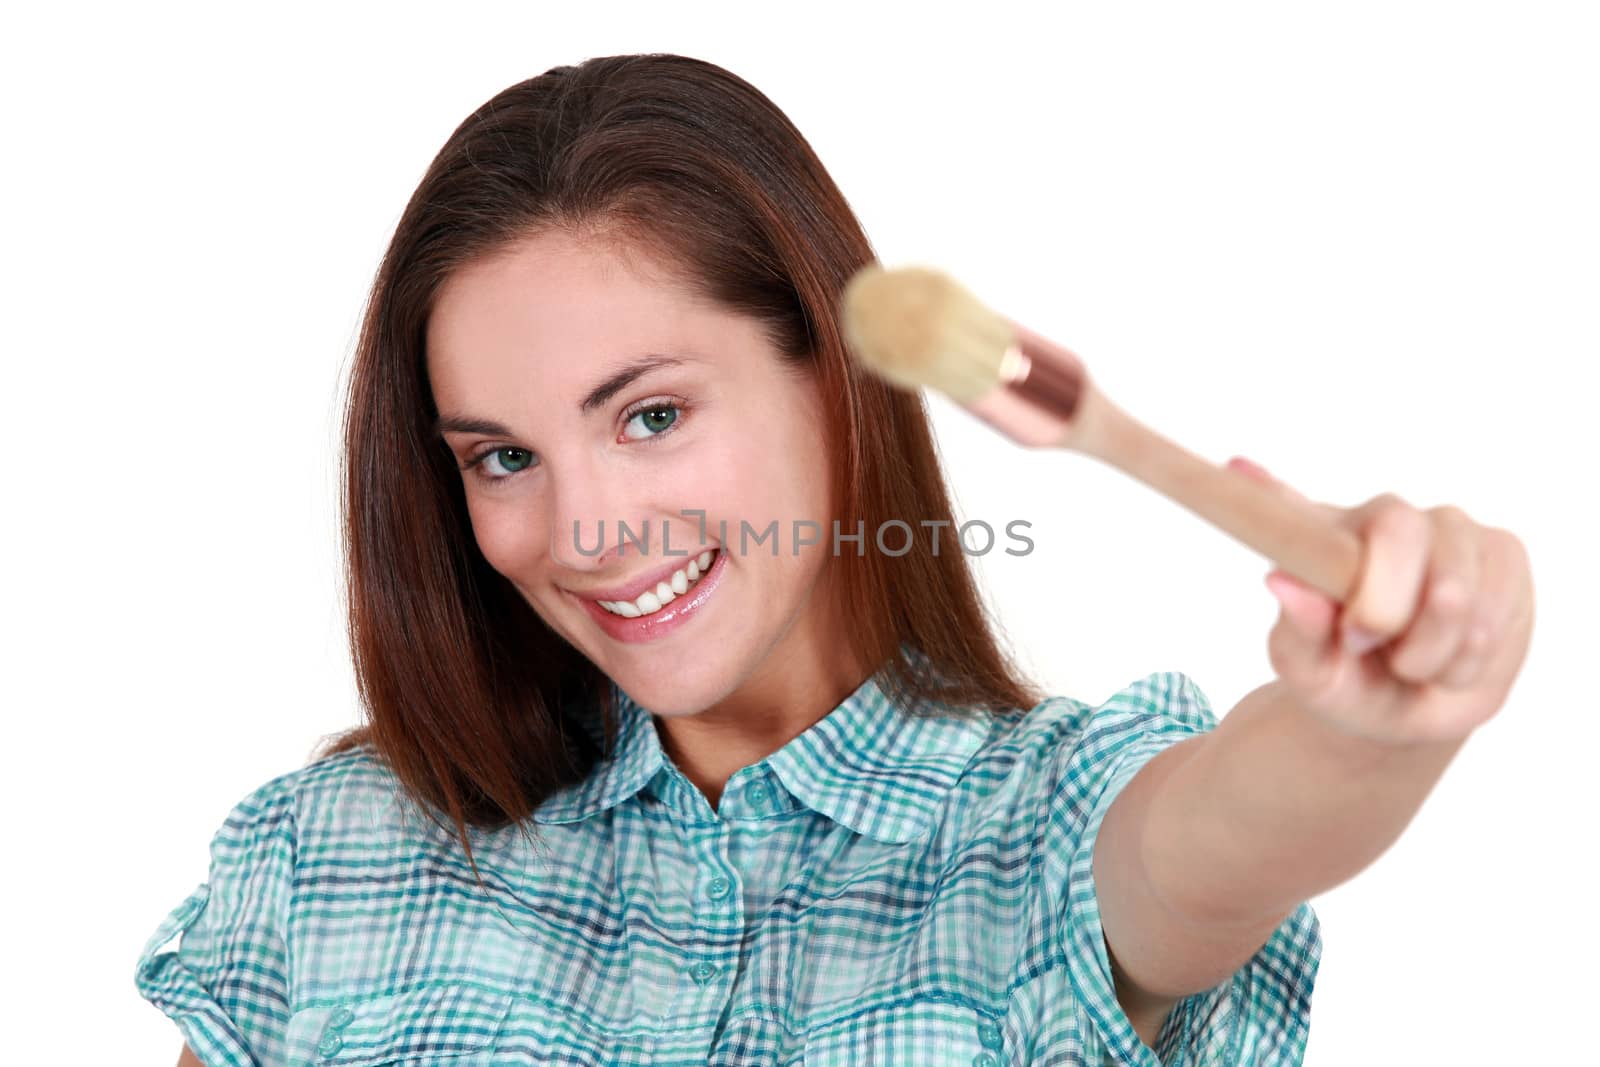 Pretty young woman showing a brush